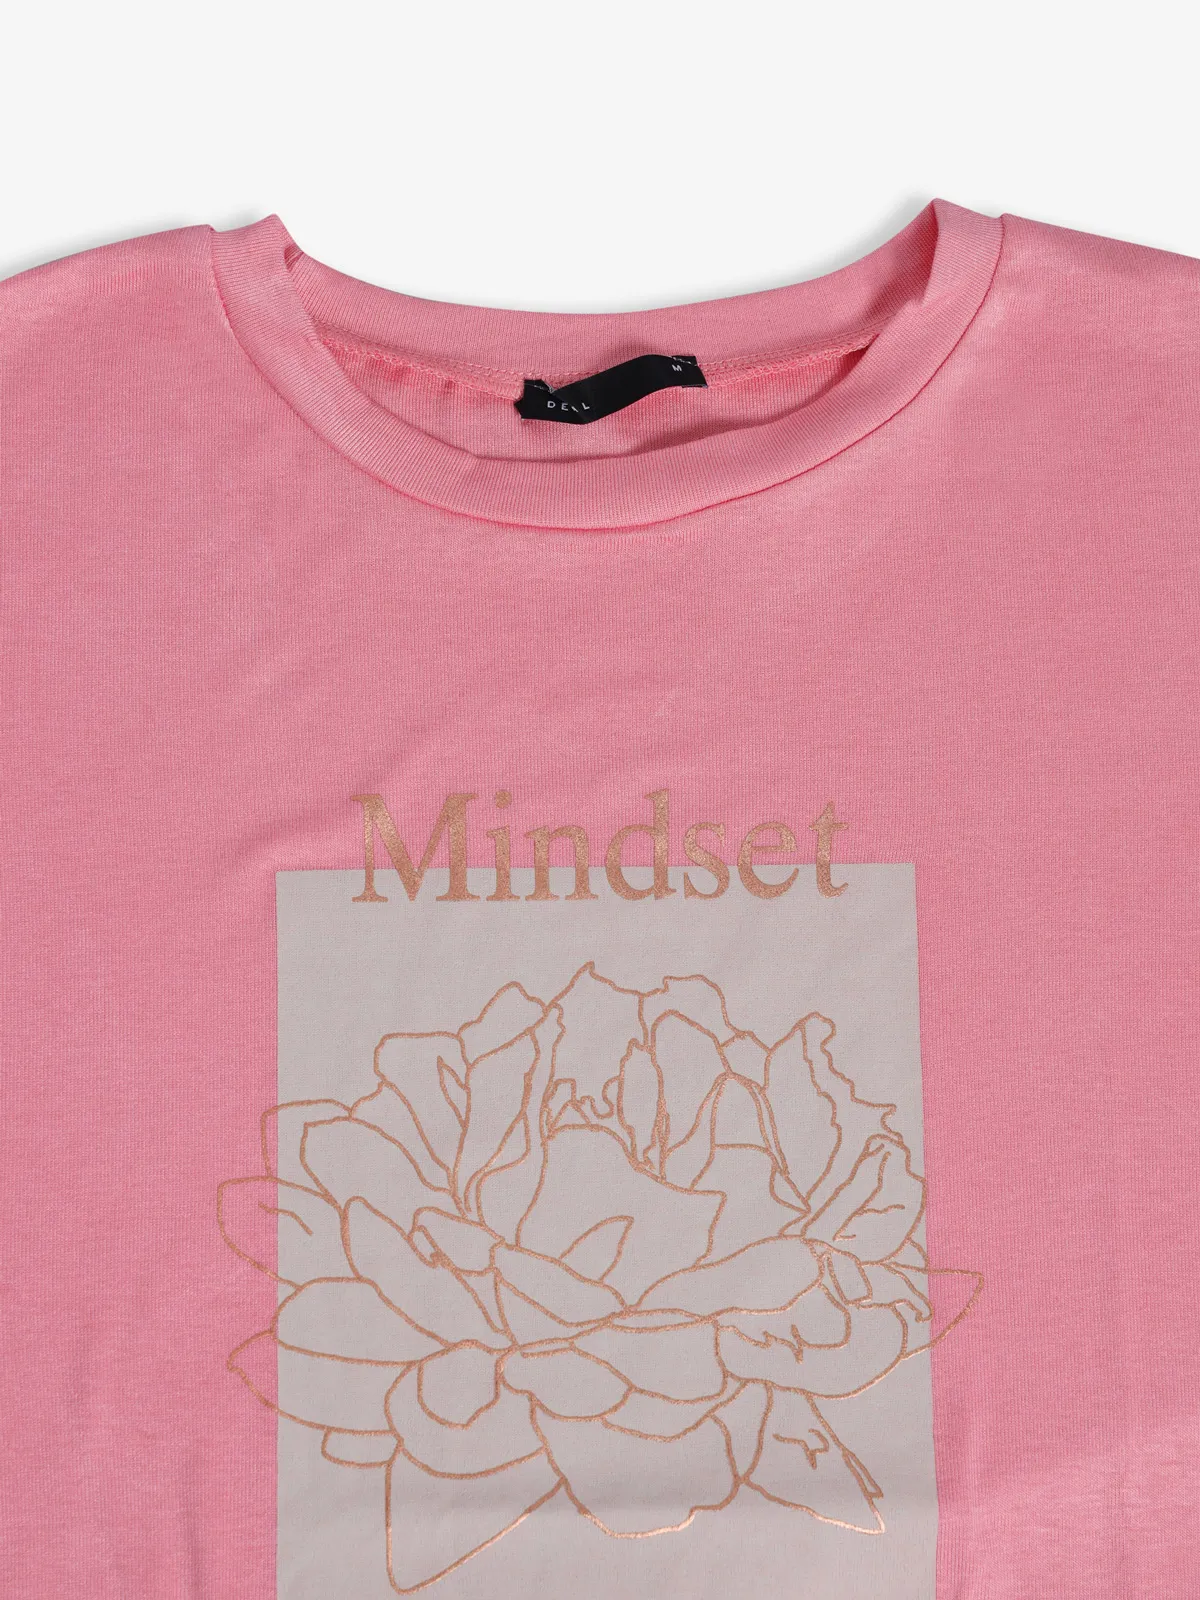 Deal pink cotton printed t-shirt